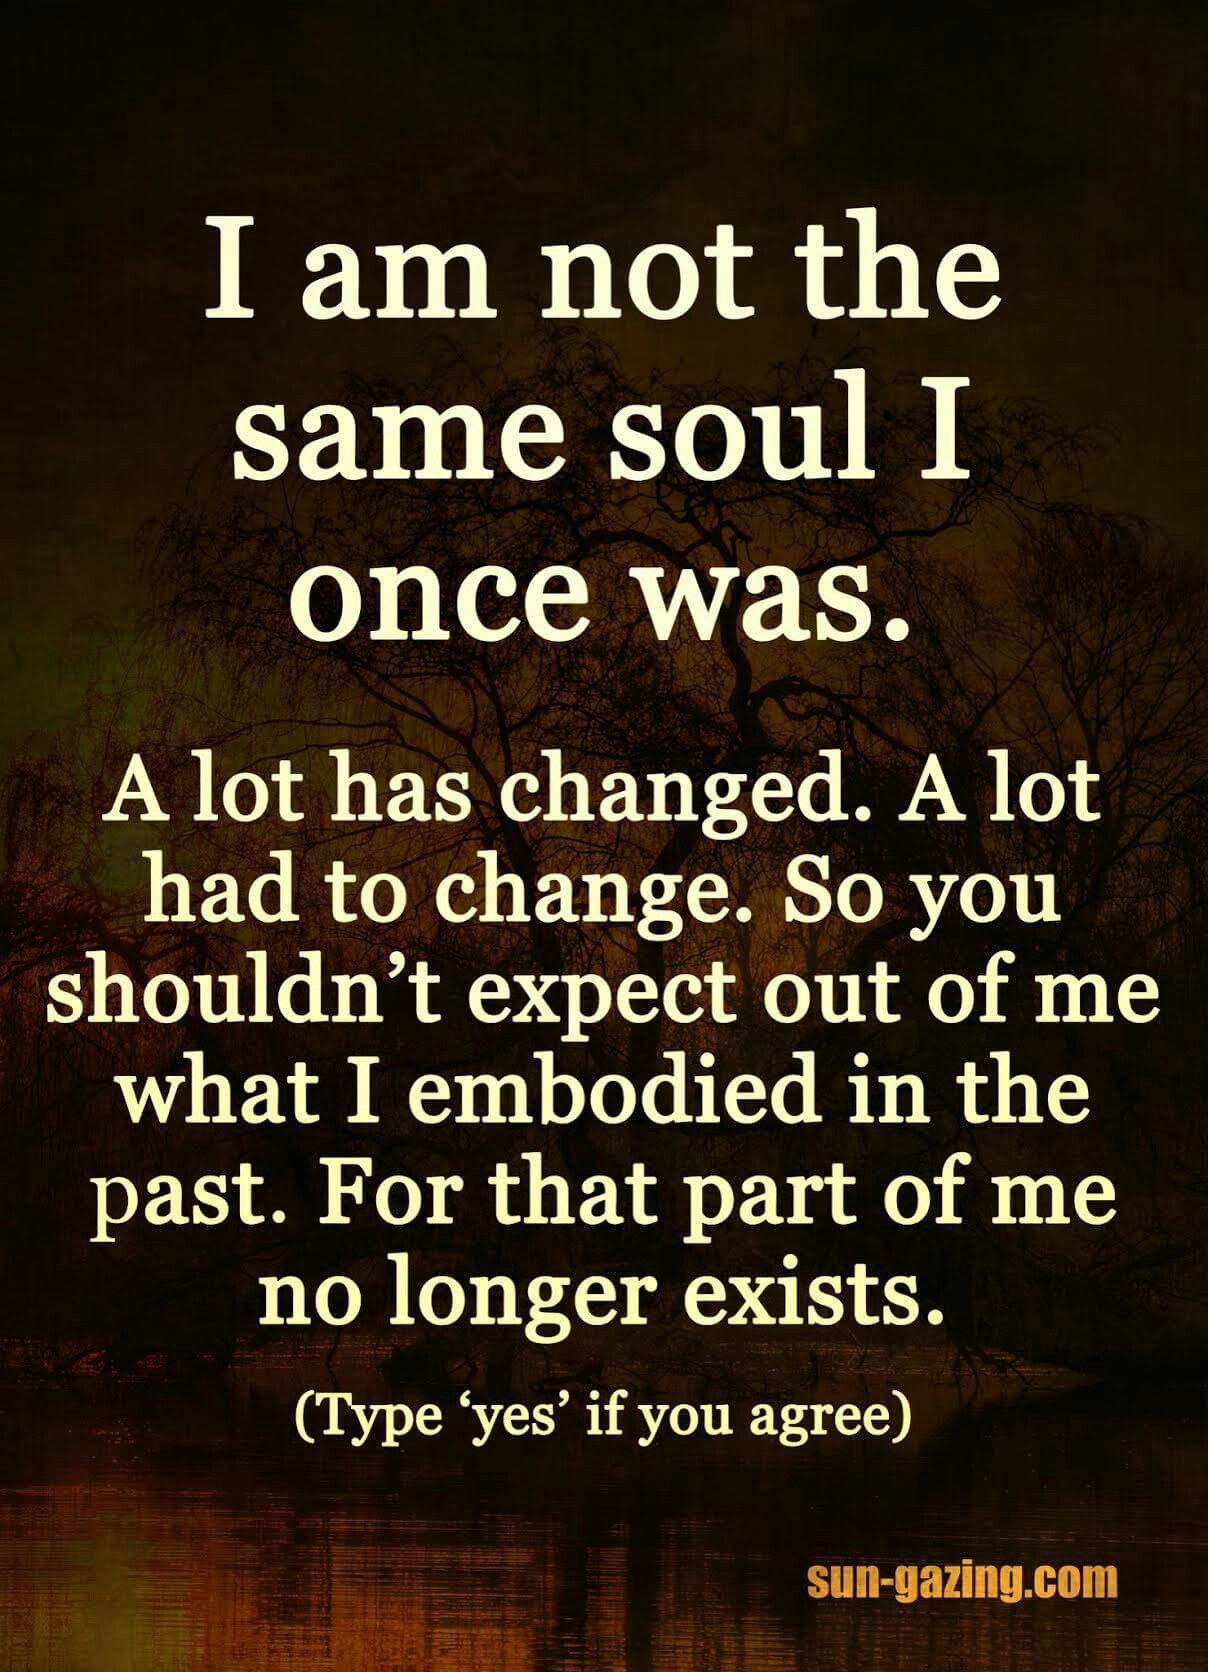 I am not the same as I once was. Thanks to my Lord and finally ...